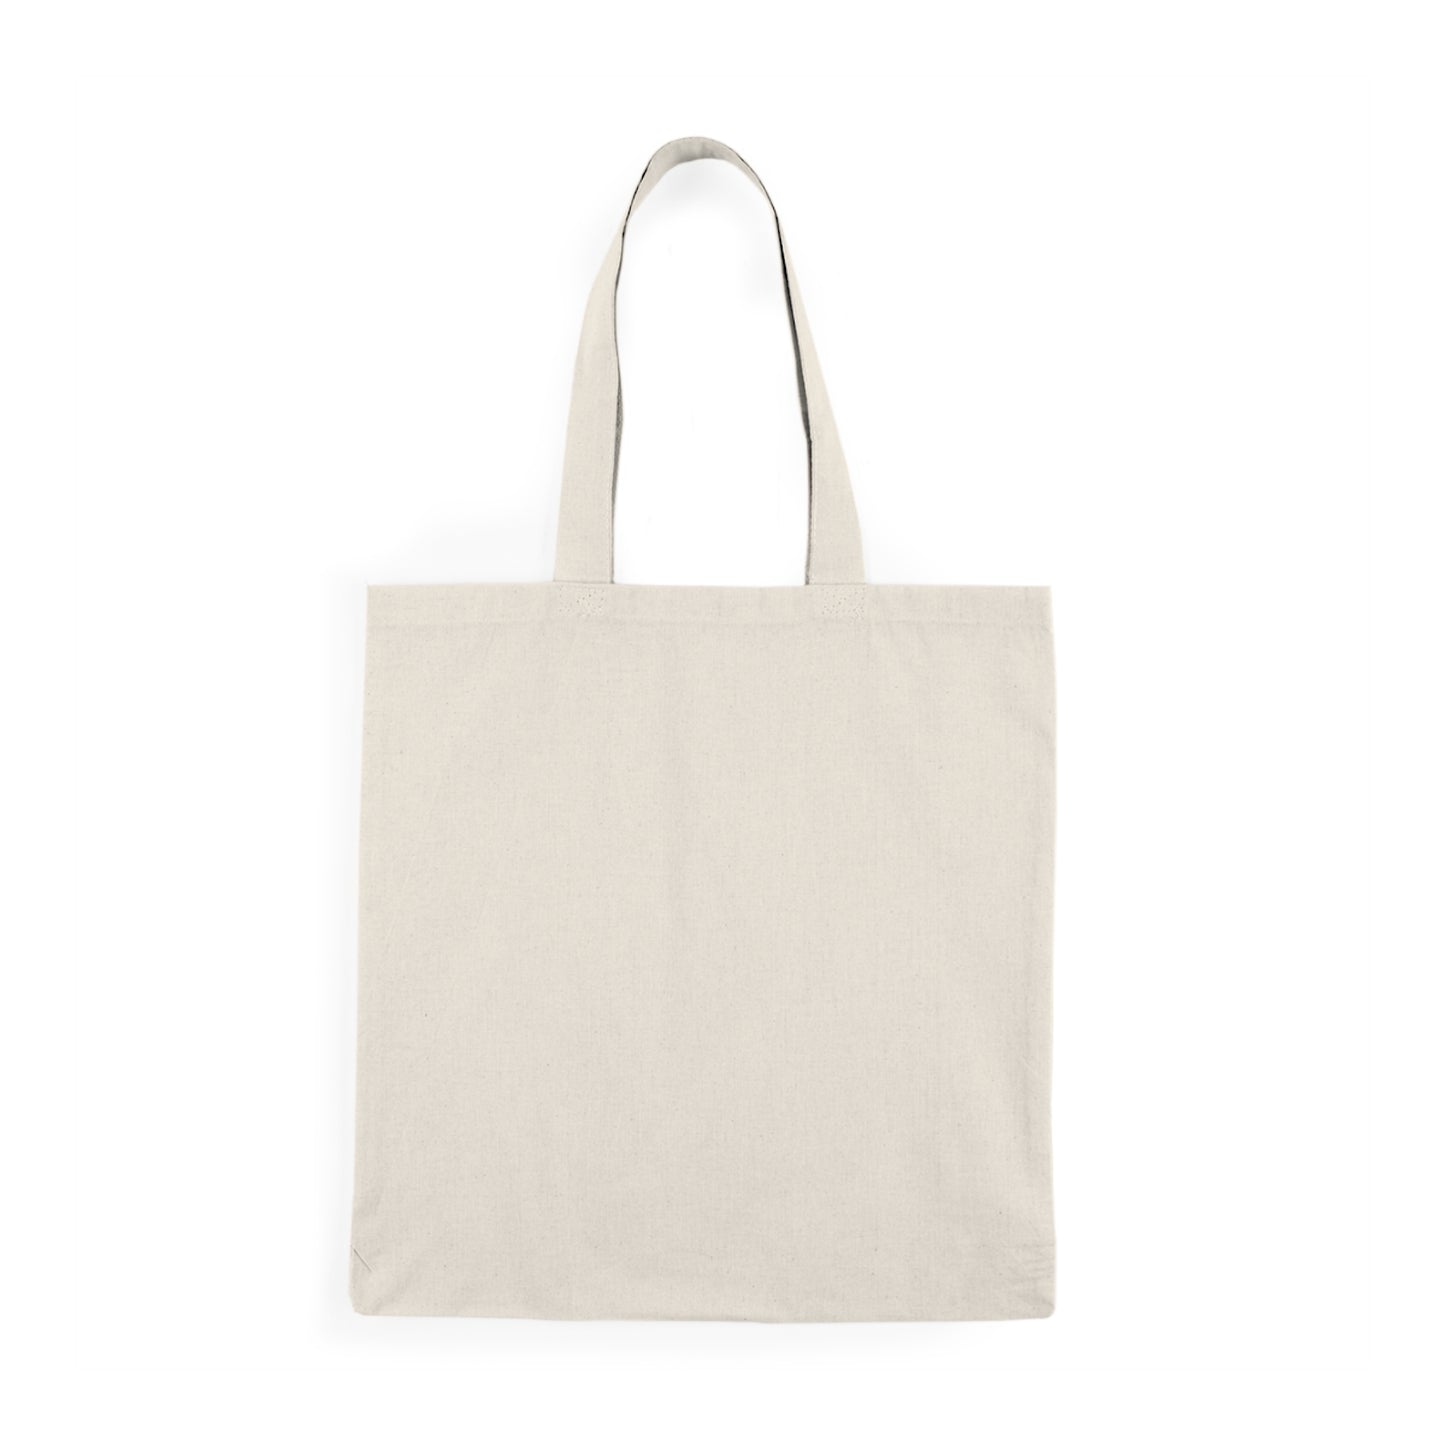 Halloween Tote Bag-Better Have My Candy